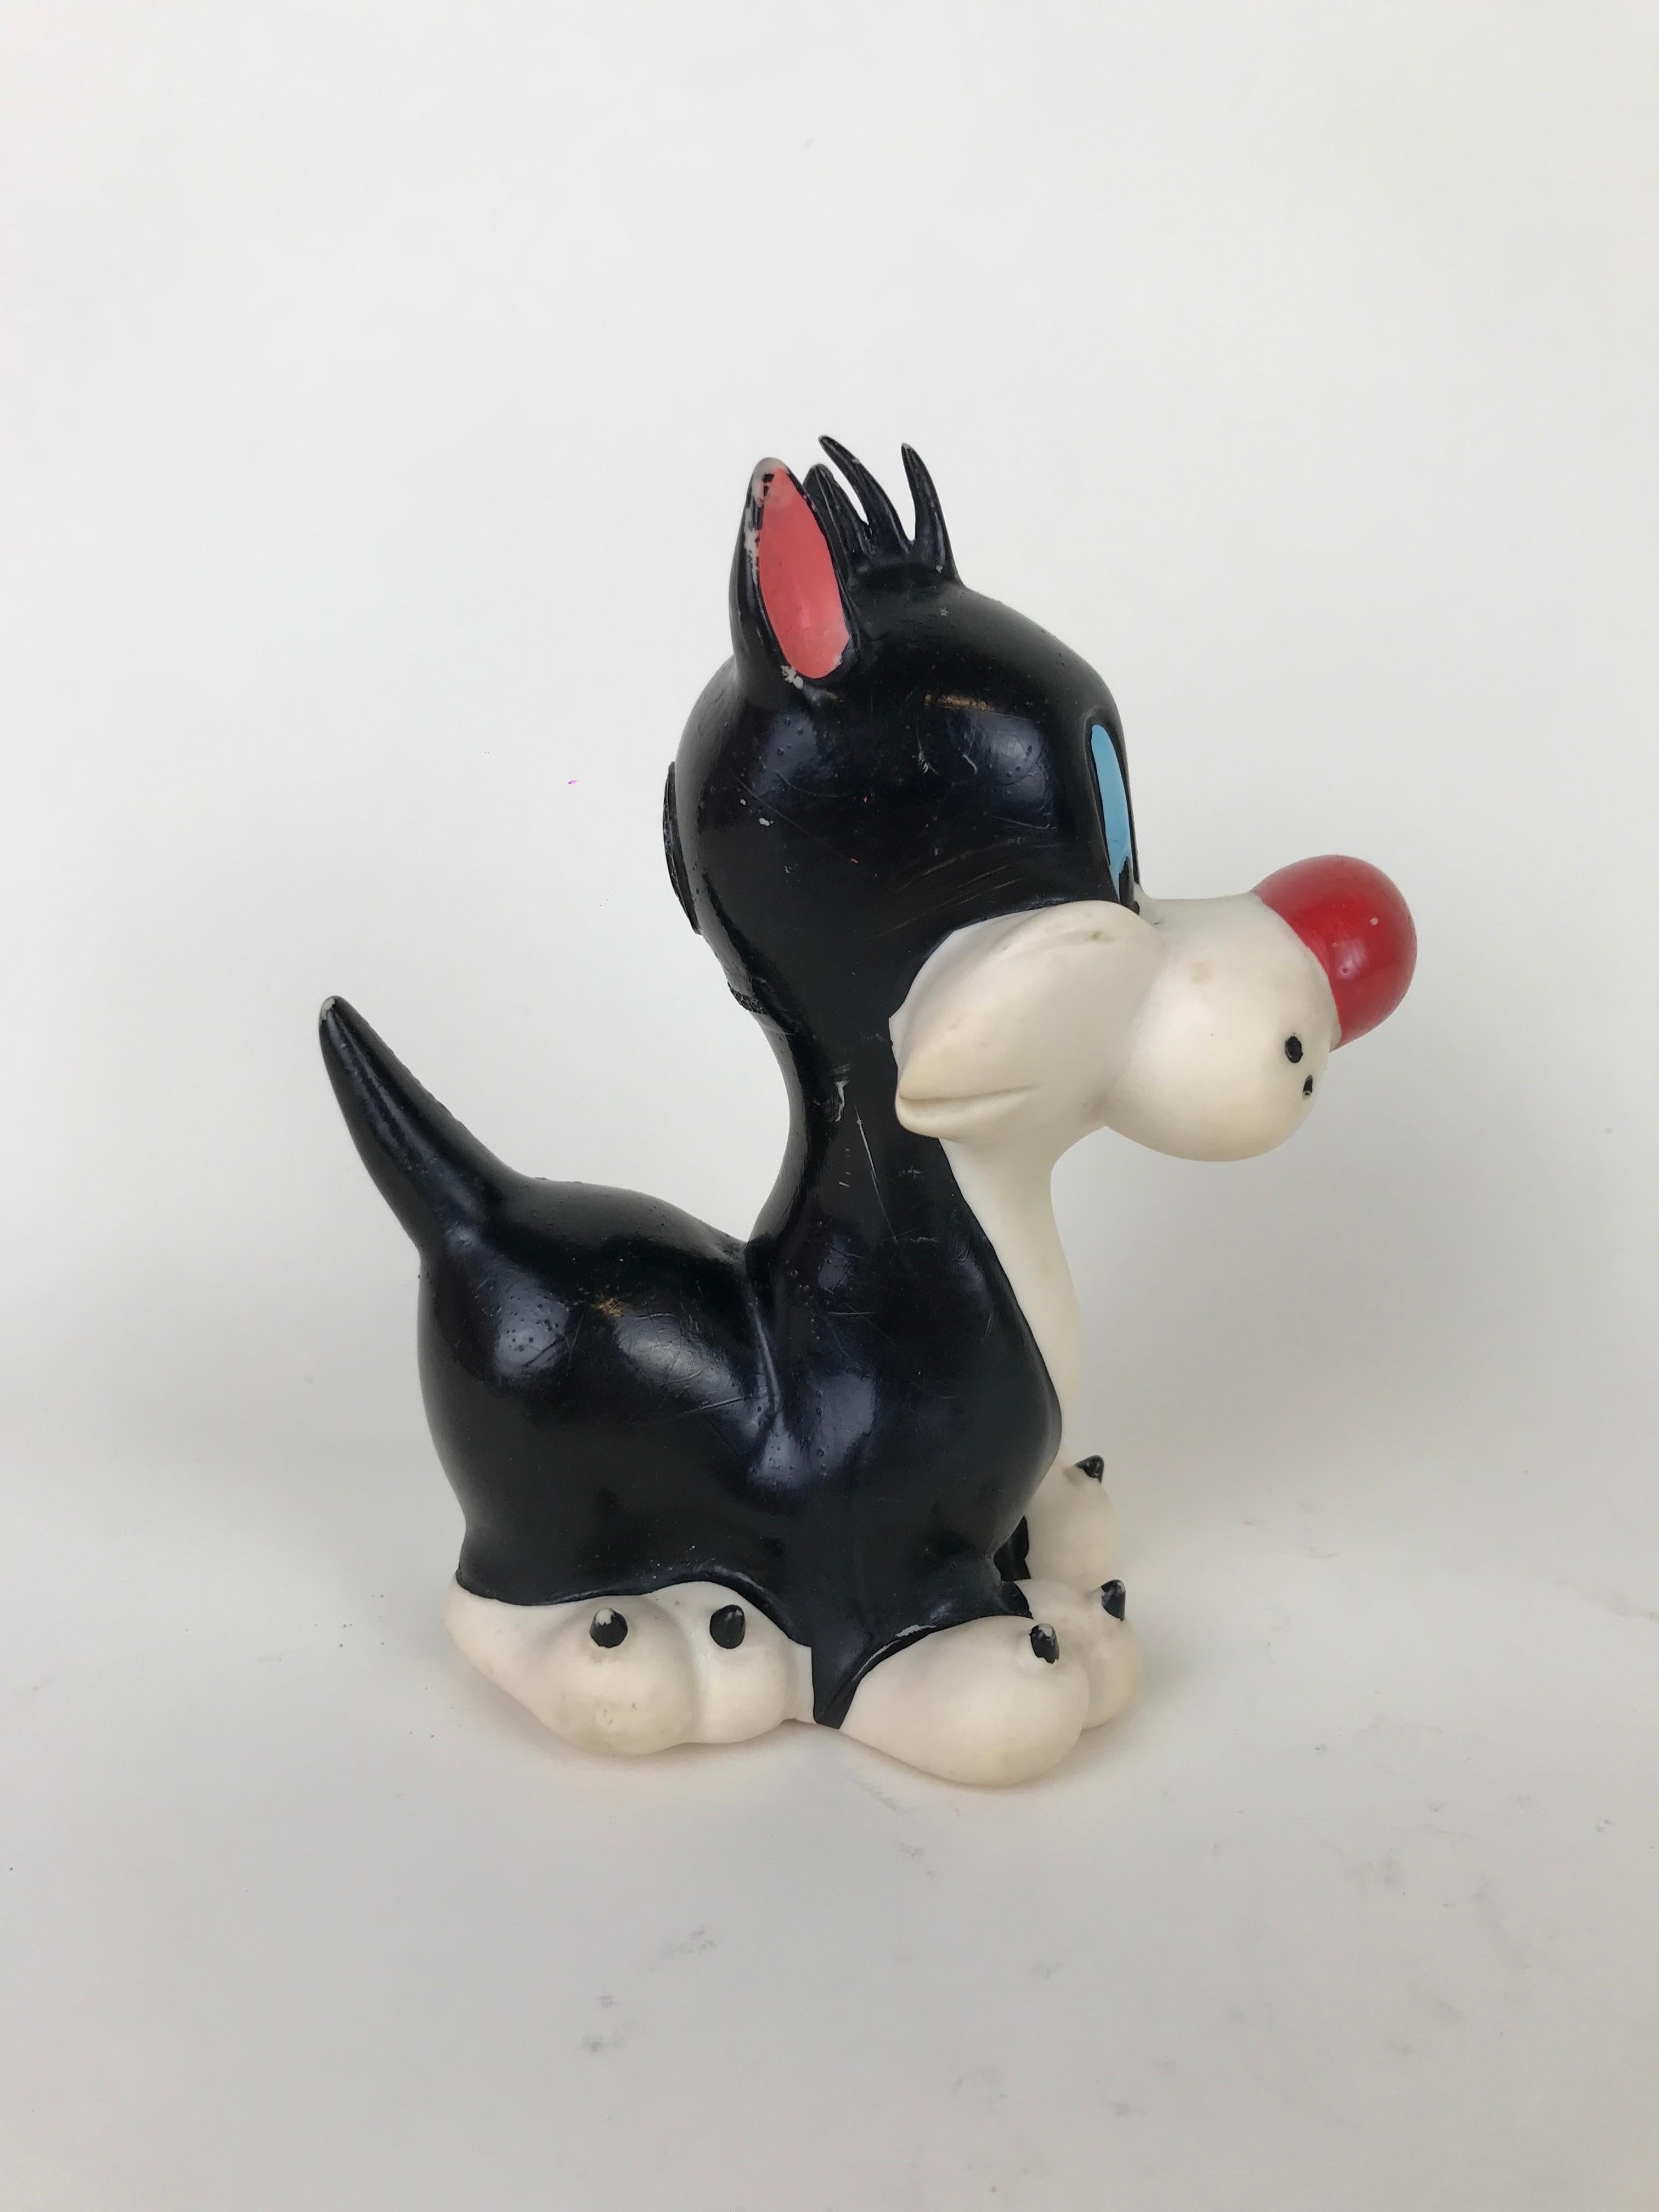 Italian 1960s Vintage Sylvester Junior Rubber Squeak Toy Made Italy by Rubbertoys